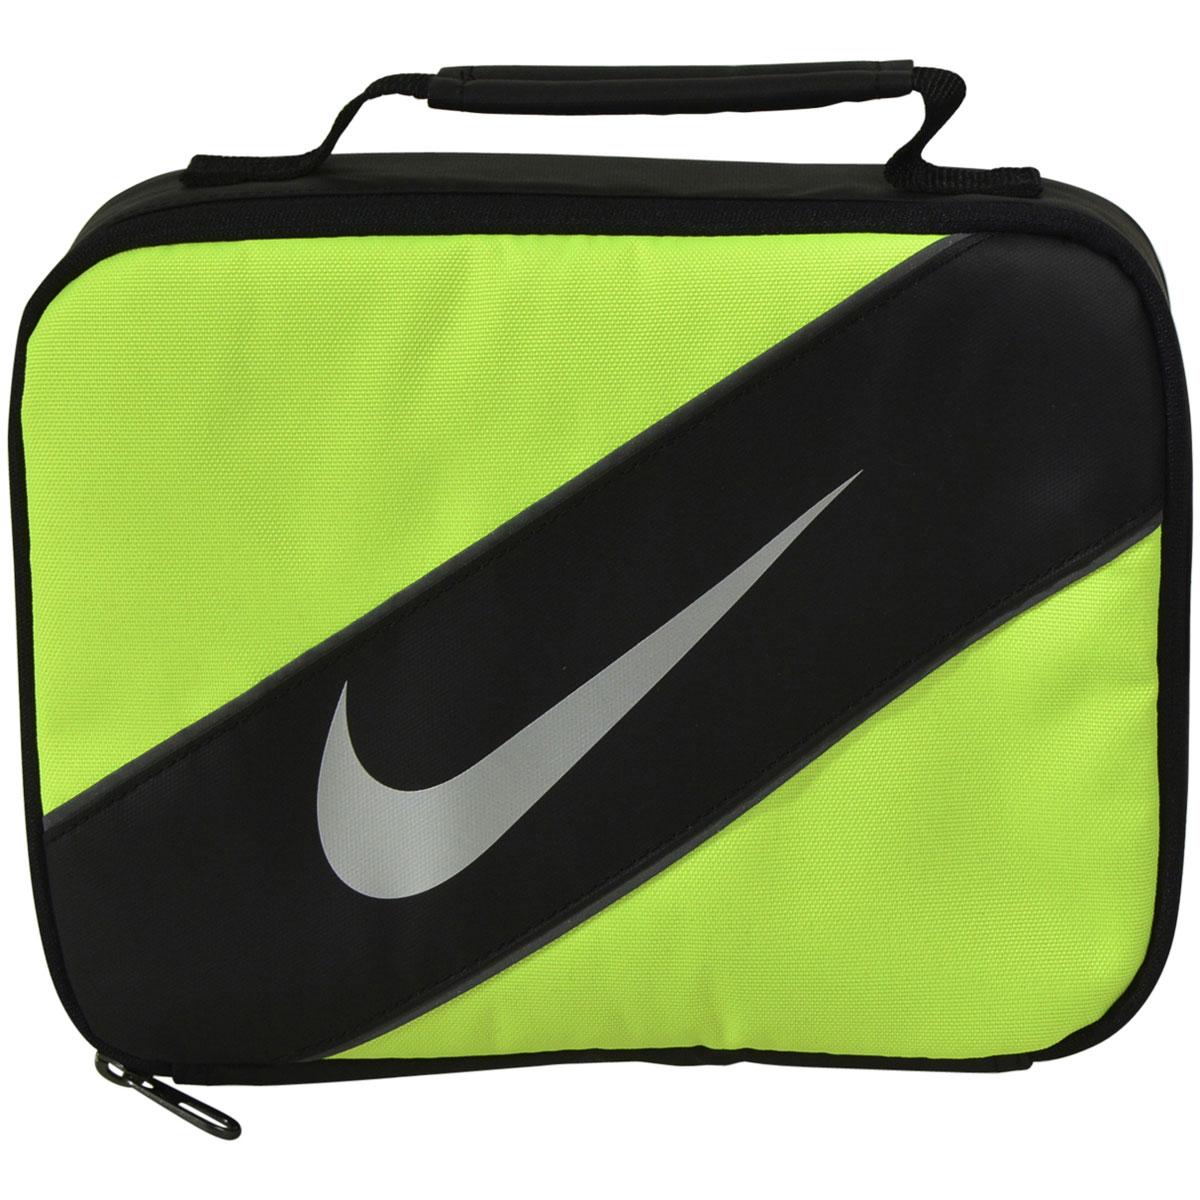 Nike Contrast Insulated Reflective Tote Lunch Bag - Green